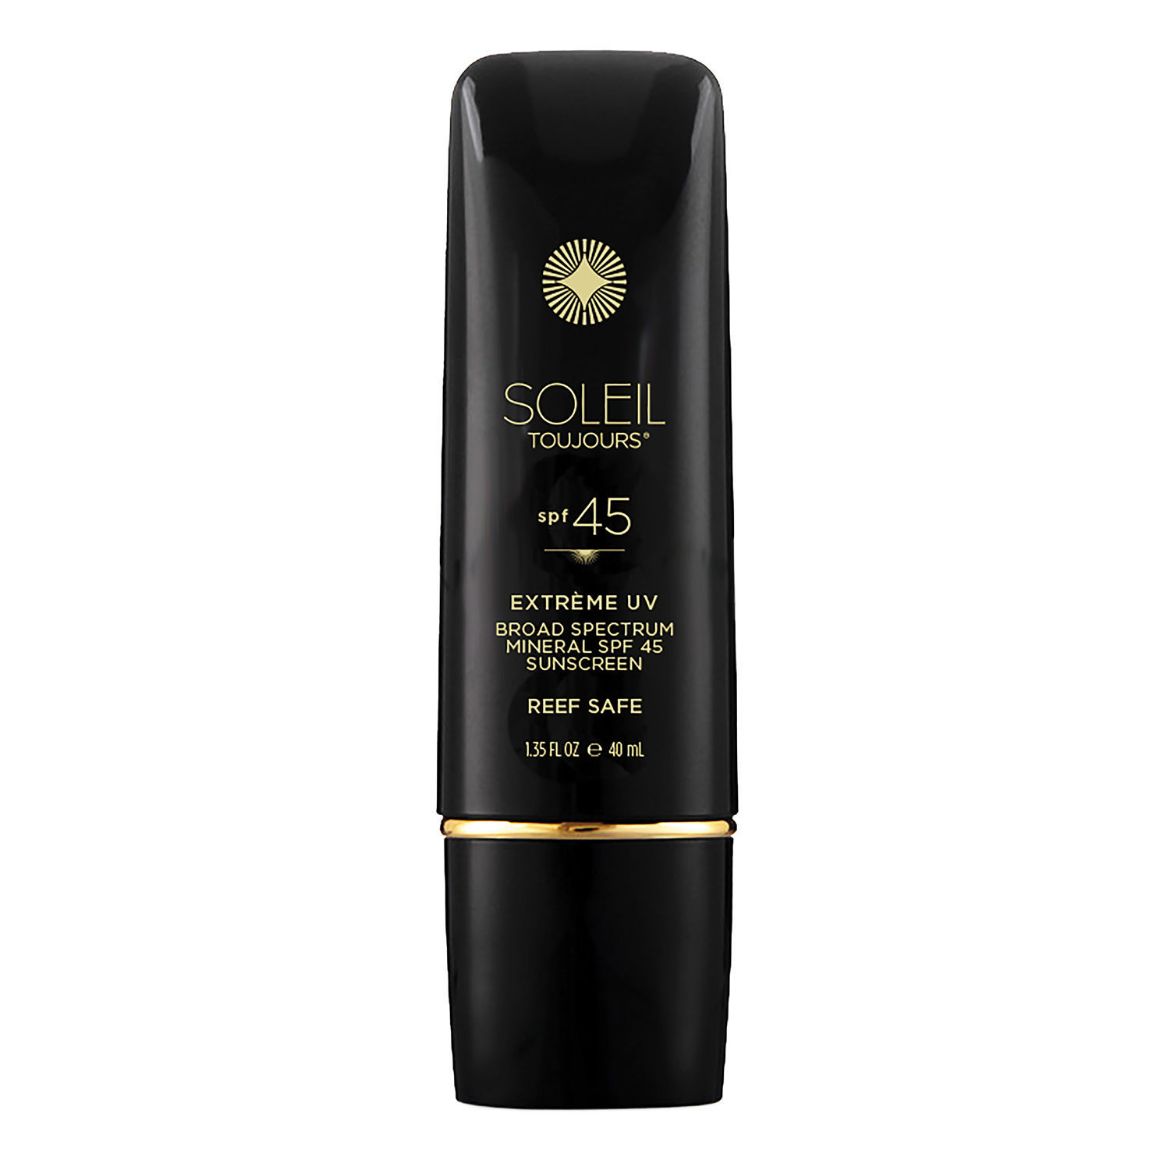 Image of Soleil Toujours Extrème UV Mineral Face Sunscreen SPF 45 (40ml)